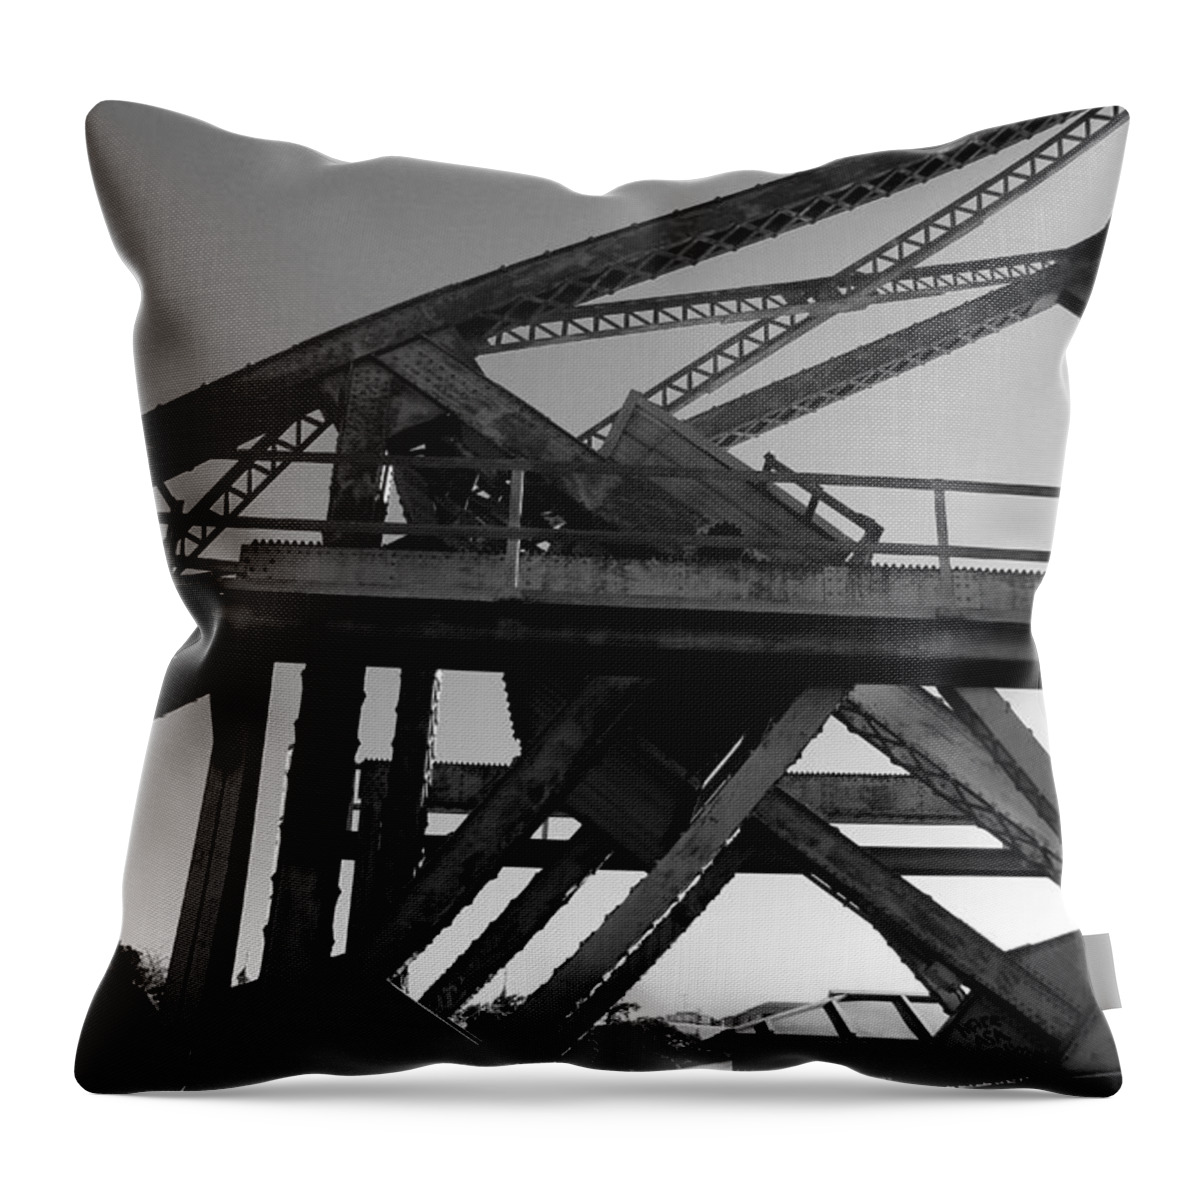 Photo For Sale Throw Pillow featuring the photograph Bridge Structure by Robert Wilder Jr